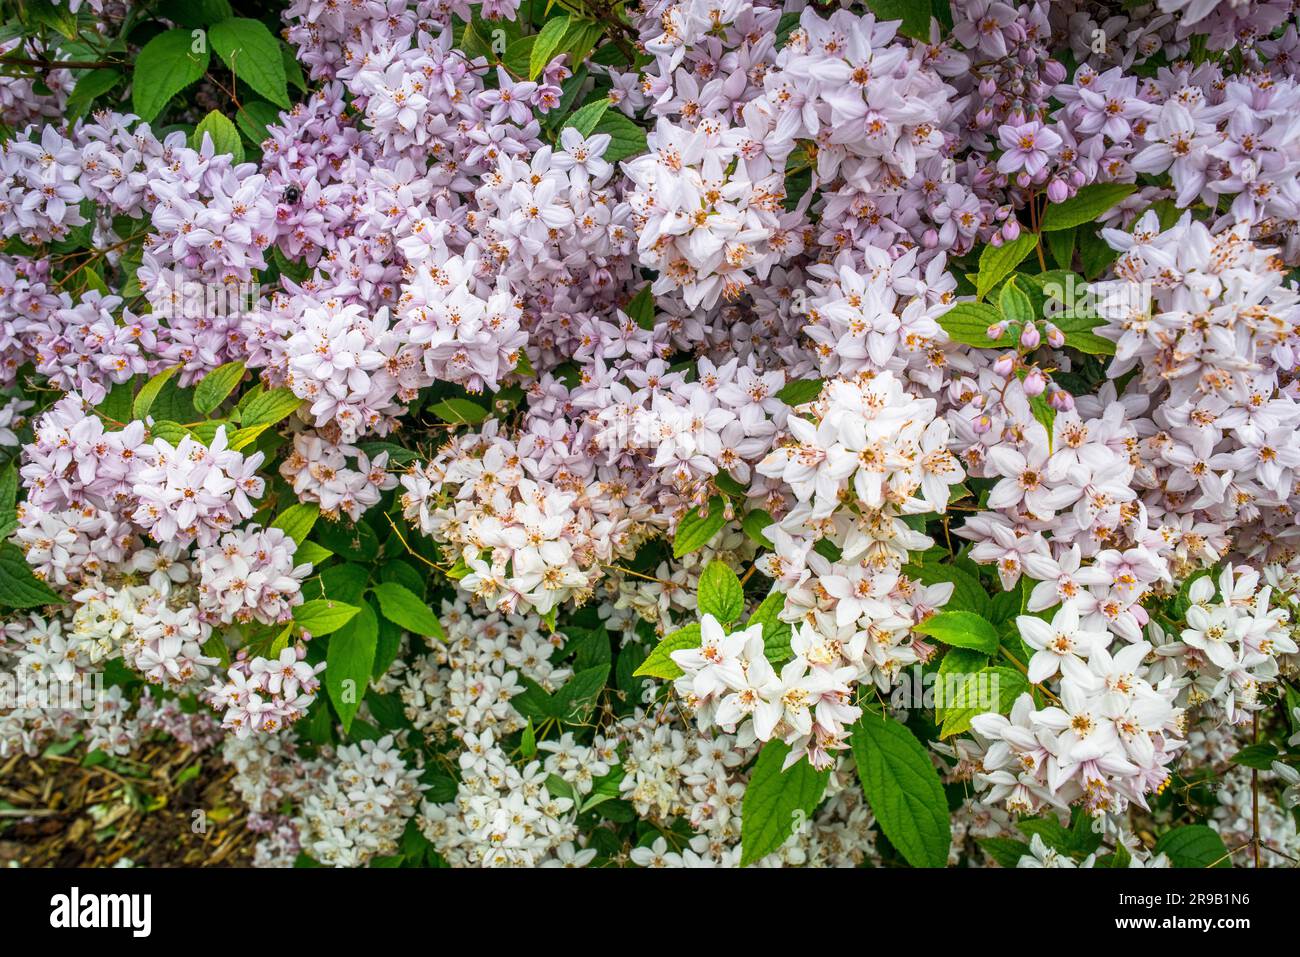 White and violet flowers on a big bush Stock Photo